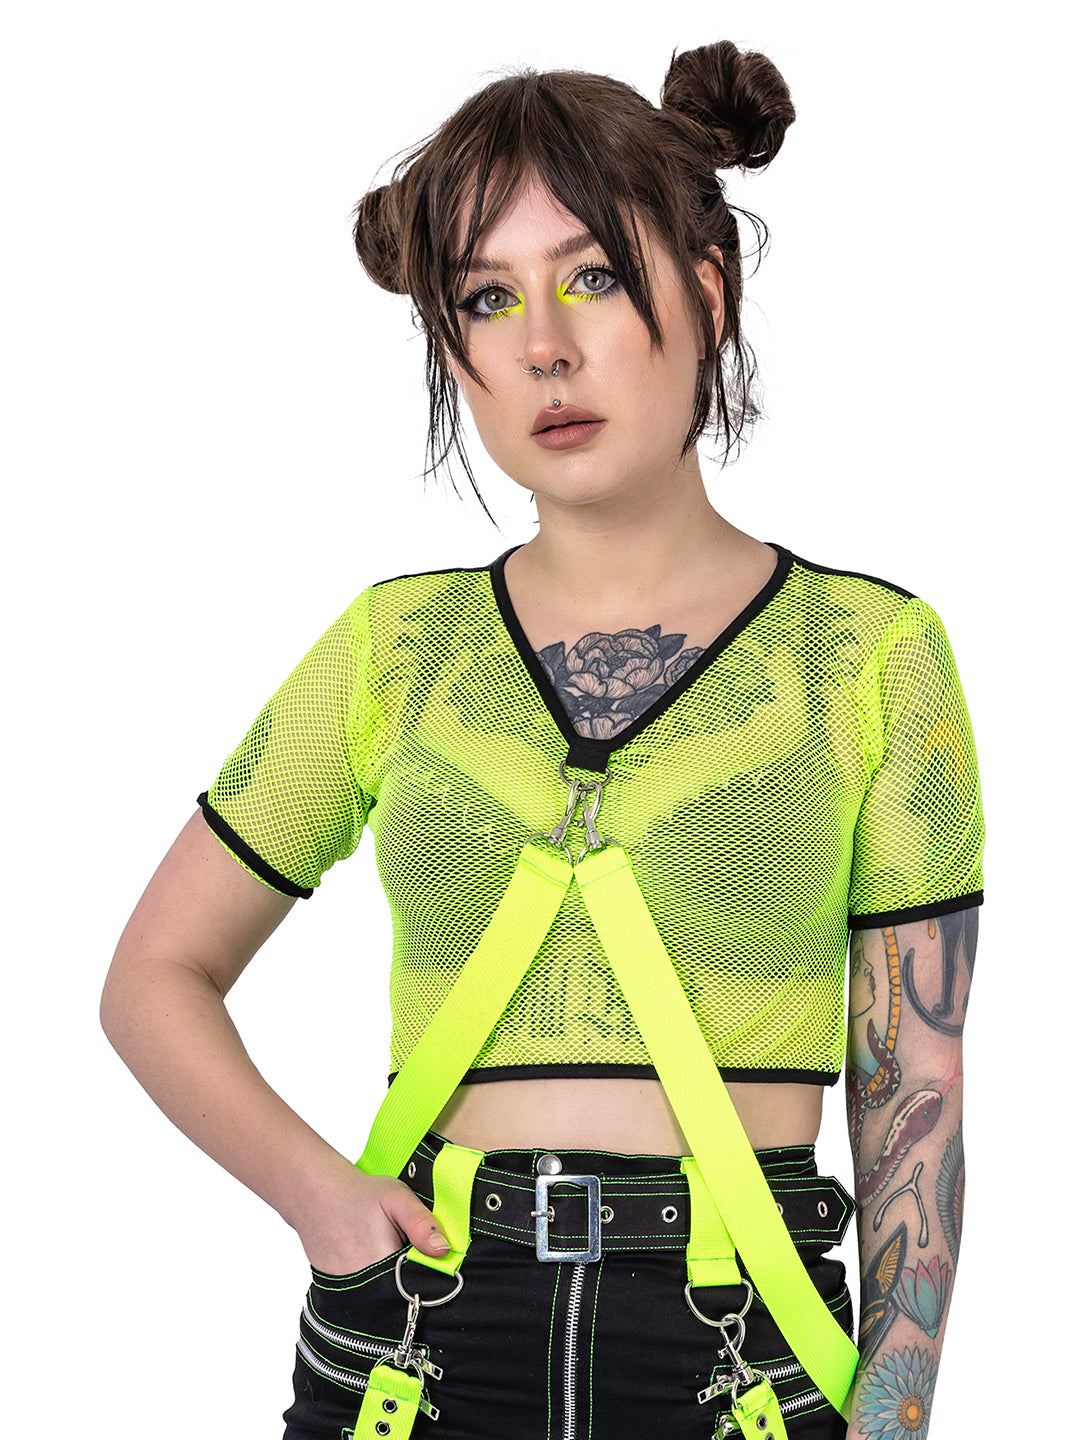 Prevail Fishnet Cropped Top